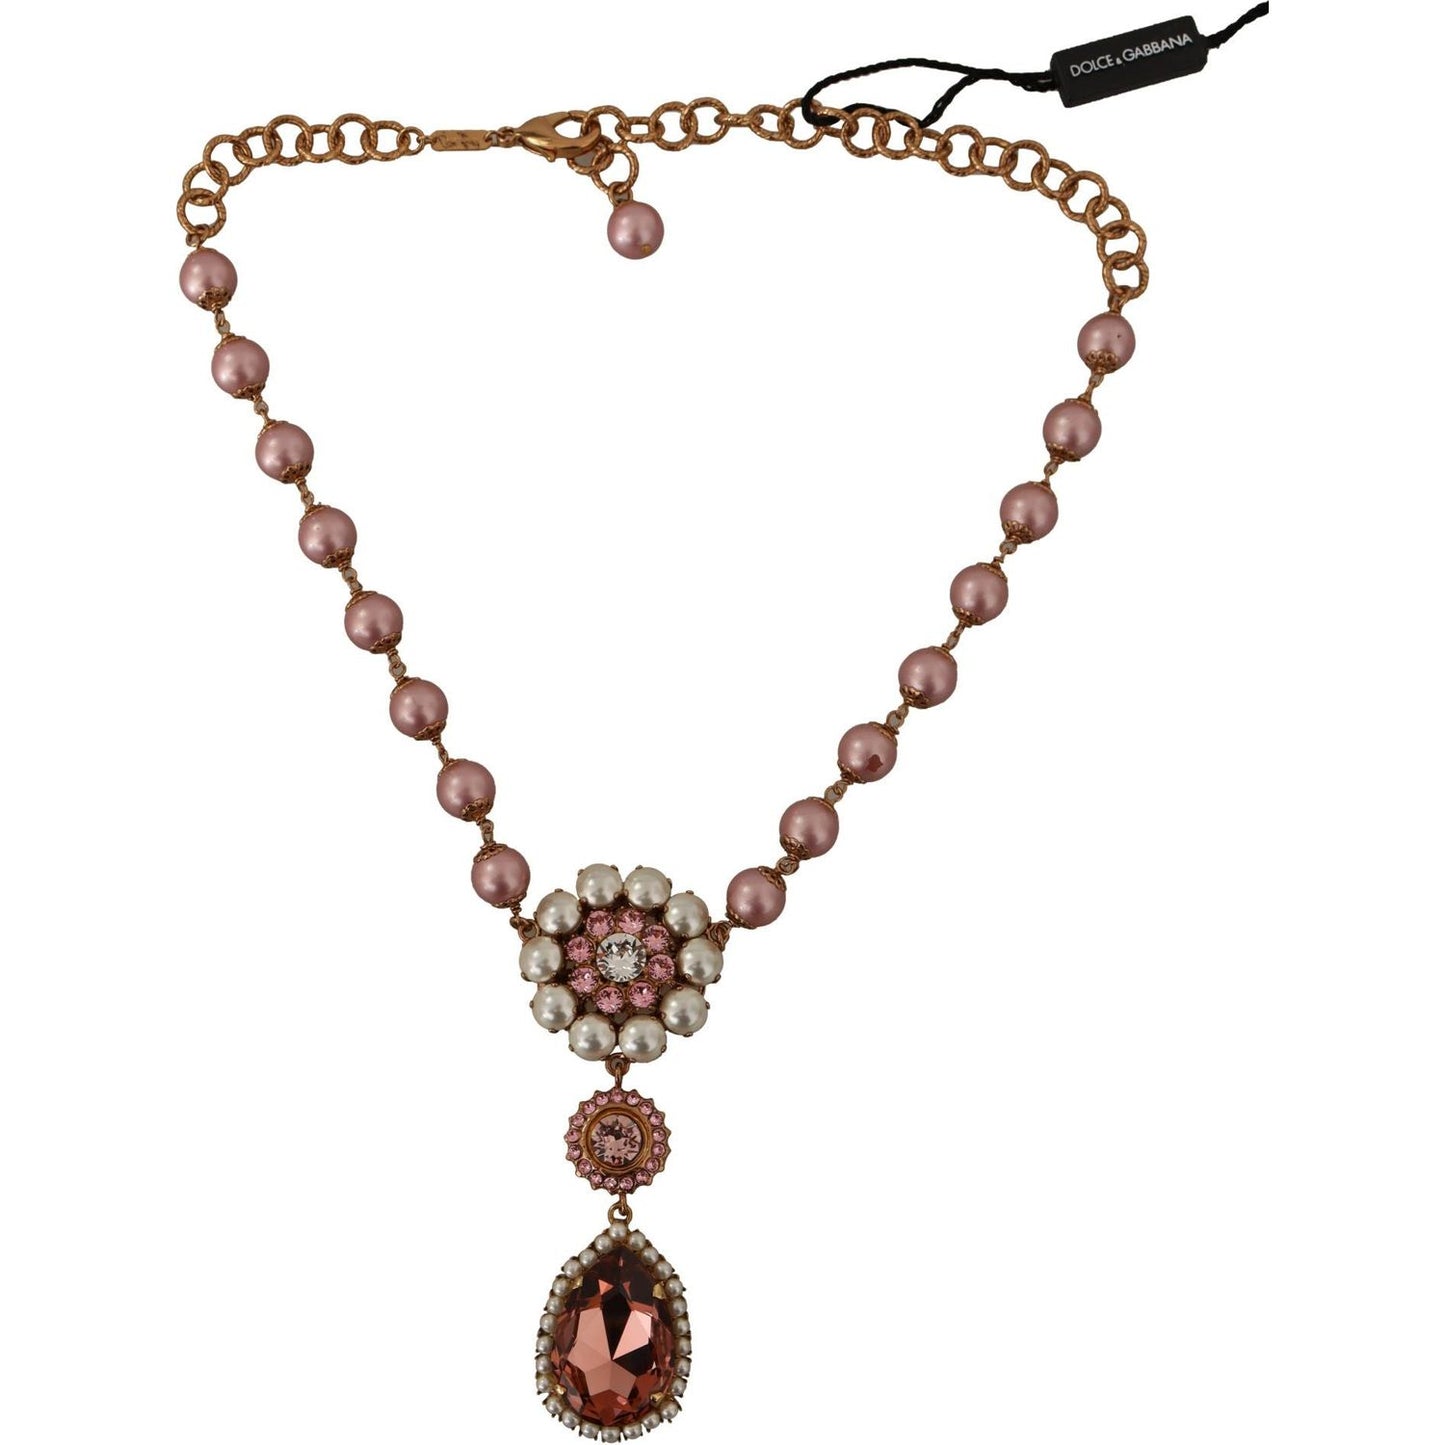 WOMAN NECKLACE Elegant Gold Tone Faux Pearl Charm Necklace Dolce & Gabbana